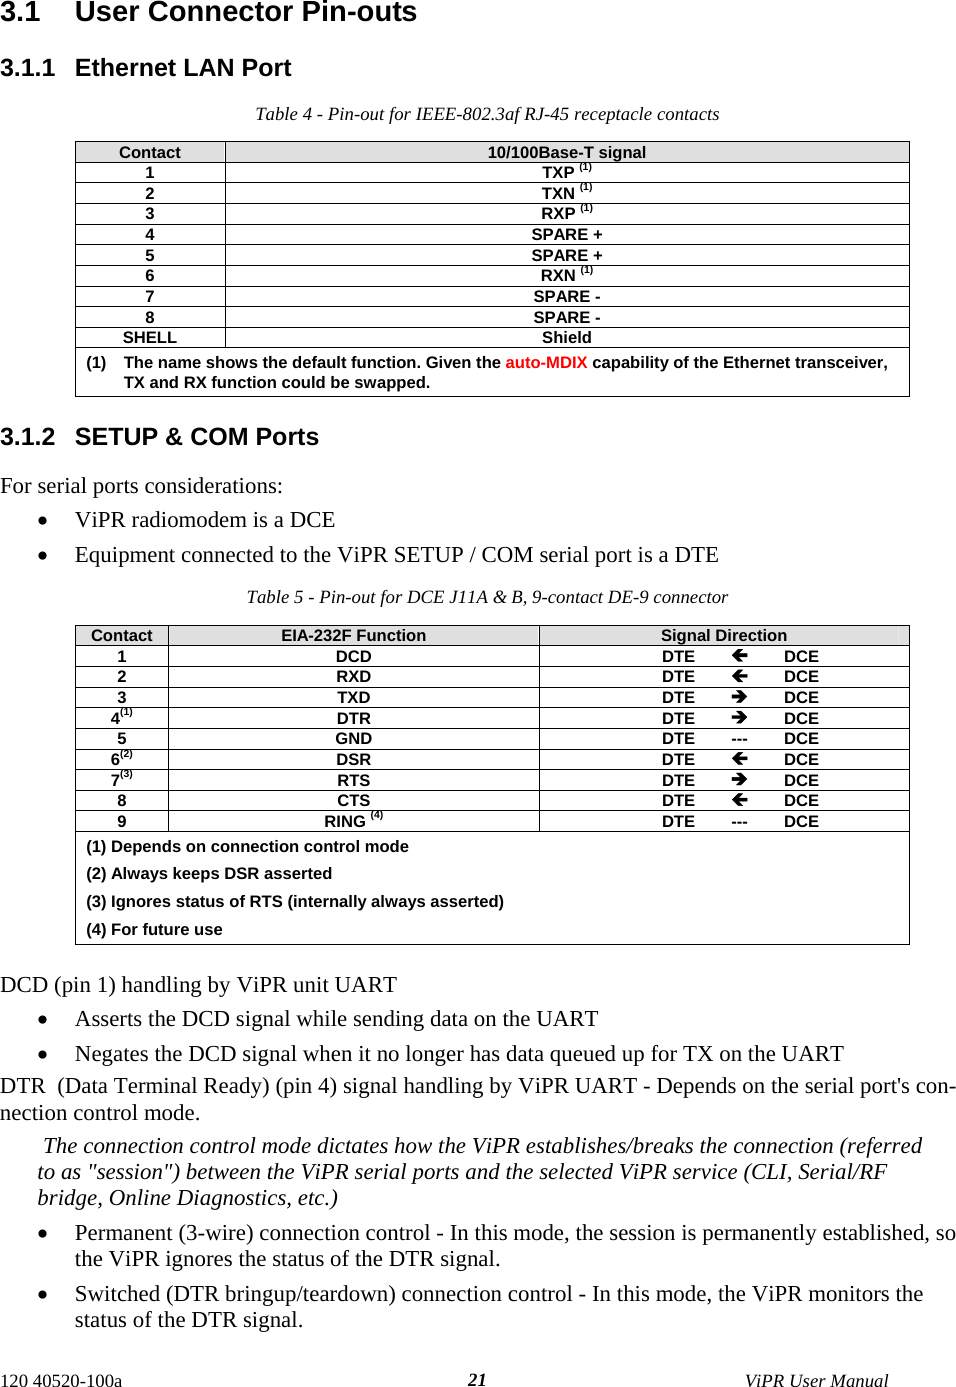  120 40520-100a    ViPR User Manual  213.1  User Connector Pin-outs 3.1.1  Ethernet LAN Port Table 4 - Pin-out for IEEE-802.3af RJ-45 receptacle contacts Contact  10/100Base-T signal 1 TXP (1) 2 TXN (1) 3 RXP (1) 4 SPARE + 5 SPARE + 6 RXN (1) 7 SPARE - 8 SPARE - SHELL Shield (1)  The name shows the default function. Given the auto-MDIX capability of the Ethernet transceiver, TX and RX function could be swapped.  3.1.2  SETUP &amp; COM Ports  For serial ports considerations:  •  ViPR radiomodem is a DCE •  Equipment connected to the ViPR SETUP / COM serial port is a DTE Table 5 - Pin-out for DCE J11A &amp; B, 9-contact DE-9 connector Contact  EIA-232F Function  Signal Direction 1 DCD  DTE Í DCE 2 RXD  DTE Í DCE 3 TXD  DTE Î DCE 4(1) DTR  DTE Î DCE 5 GND  DTE --- DCE 6(2) DSR  DTE Í DCE 7(3) RTS  DTE Î DCE 8 CTS  DTE Í DCE 9 RING (4) DTE --- DCE (1) Depends on connection control mode (2) Always keeps DSR asserted (3) Ignores status of RTS (internally always asserted) (4) For future use  DCD (pin 1) handling by ViPR unit UART •  Asserts the DCD signal while sending data on the UART •  Negates the DCD signal when it no longer has data queued up for TX on the UART DTR  (Data Terminal Ready) (pin 4) signal handling by ViPR UART - Depends on the serial port&apos;s con-nection control mode.  The connection control mode dictates how the ViPR establishes/breaks the connection (referred to as &quot;session&quot;) between the ViPR serial ports and the selected ViPR service (CLI, Serial/RF bridge, Online Diagnostics, etc.)  •  Permanent (3-wire) connection control - In this mode, the session is permanently established, so the ViPR ignores the status of the DTR signal.  •  Switched (DTR bringup/teardown) connection control - In this mode, the ViPR monitors the status of the DTR signal.  